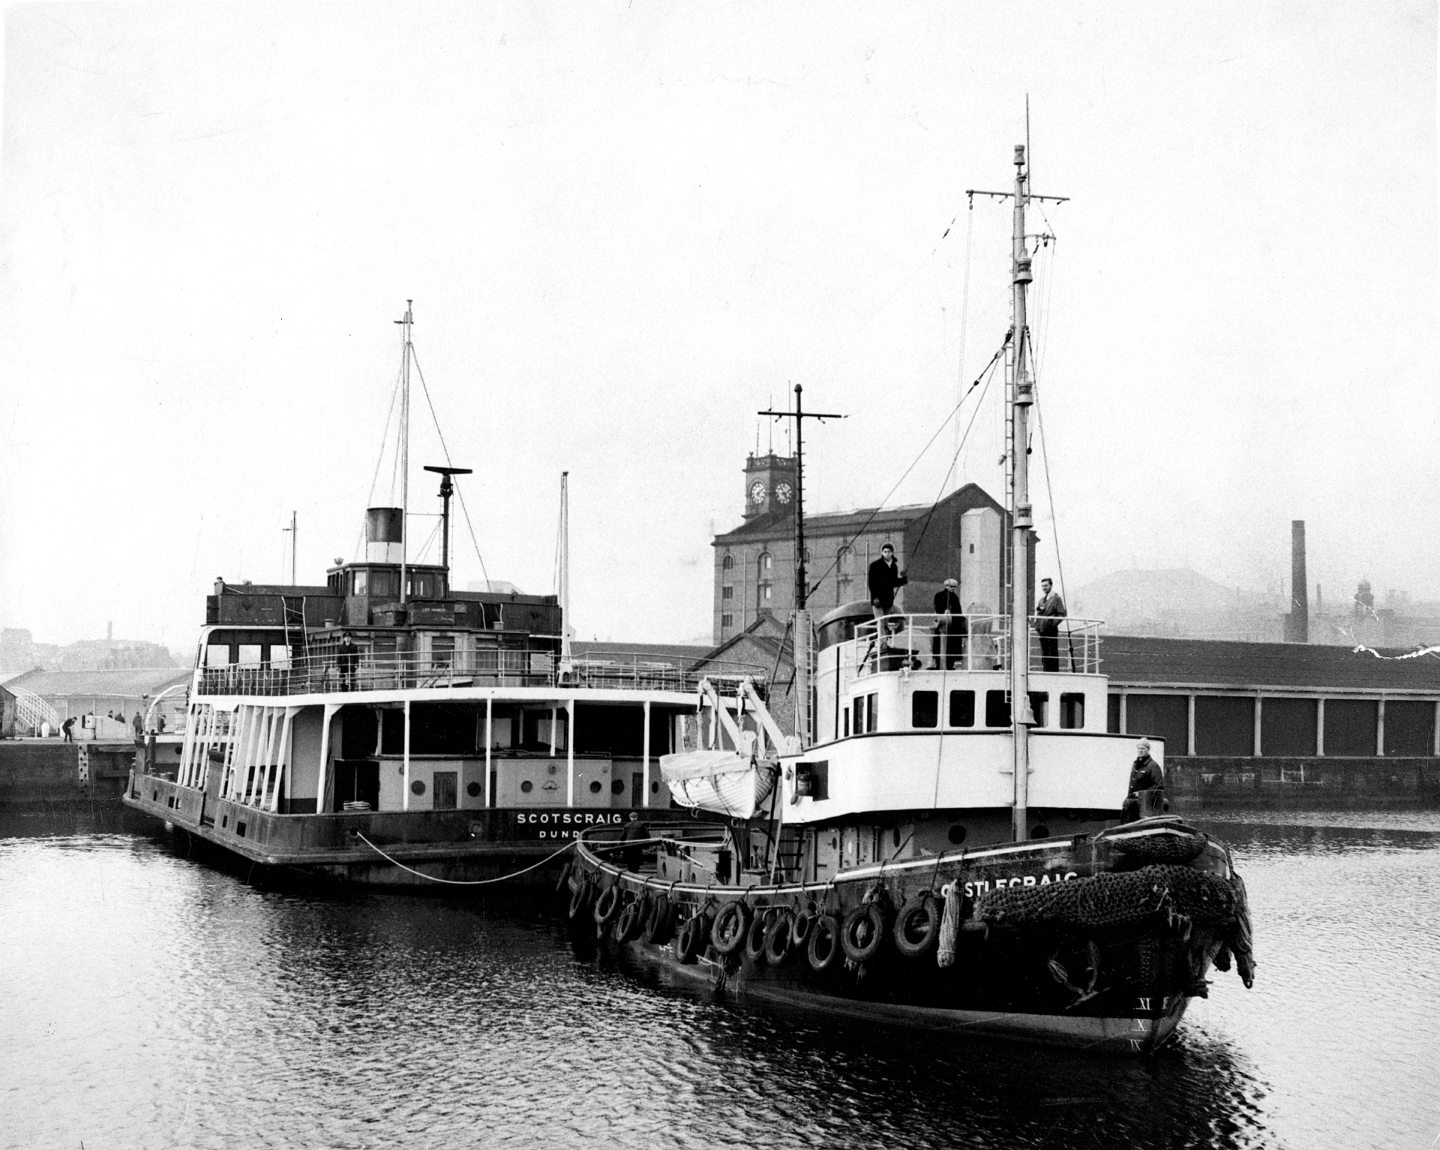 The Scotscraig being towed from Dundee Harbour by the tug Castlecraig in February 1968.